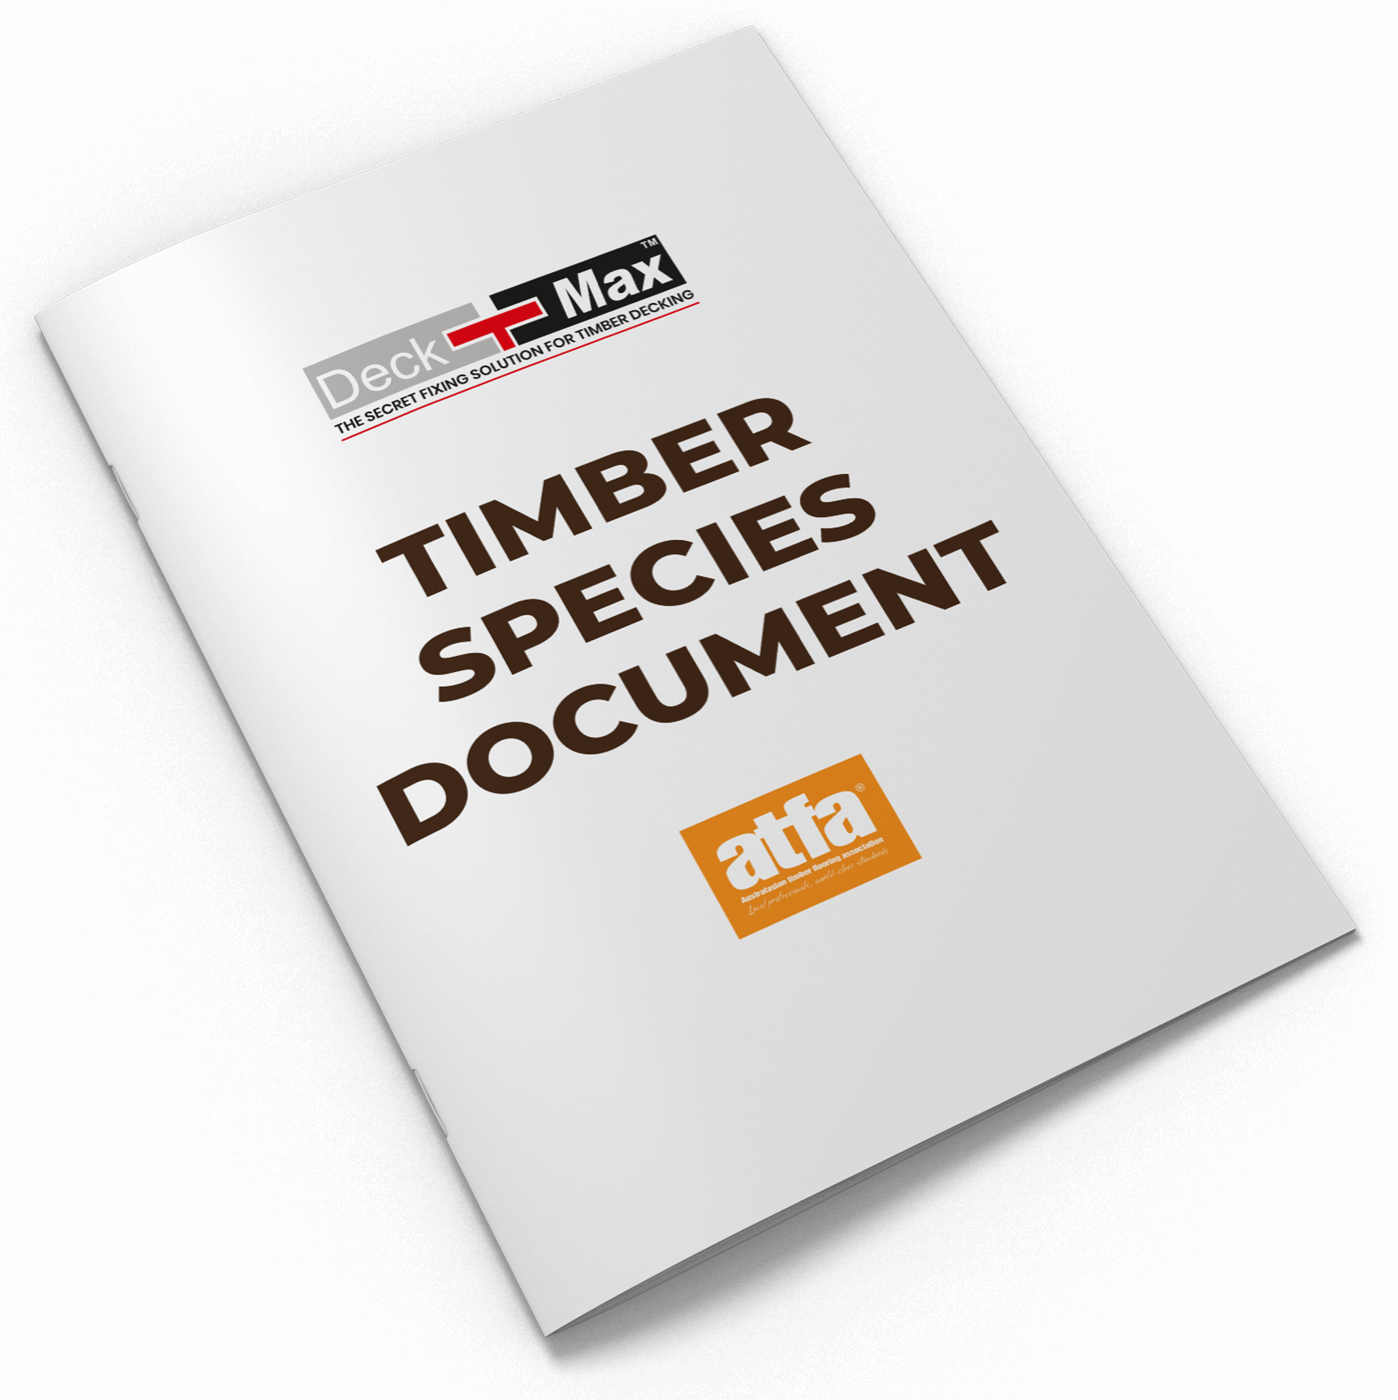 Deck-Max Timber Species Document in PDF